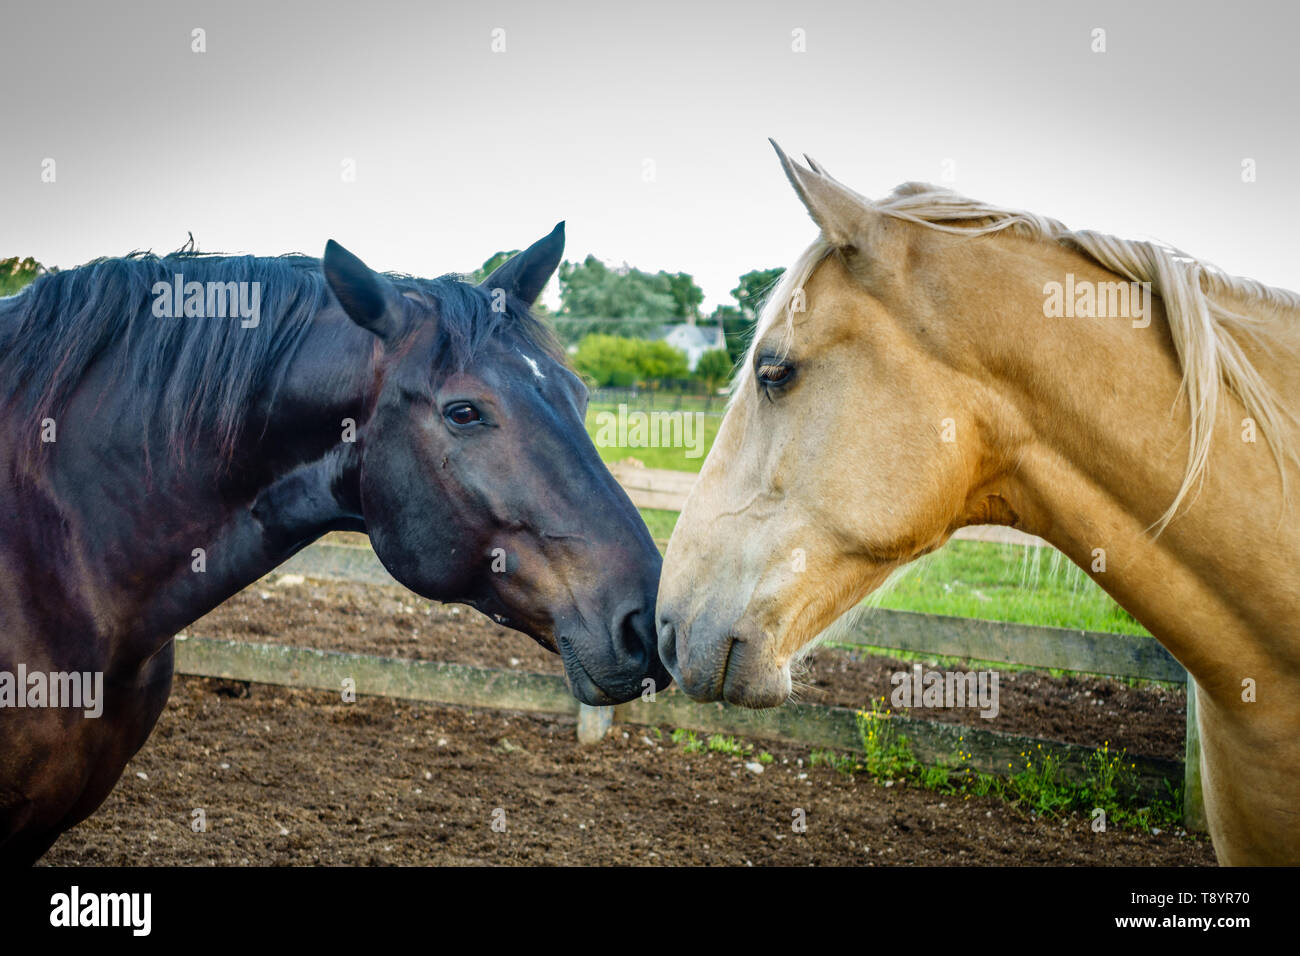 Closeup of two horses rubbing noses on a farm in Kentucky Stock Photo